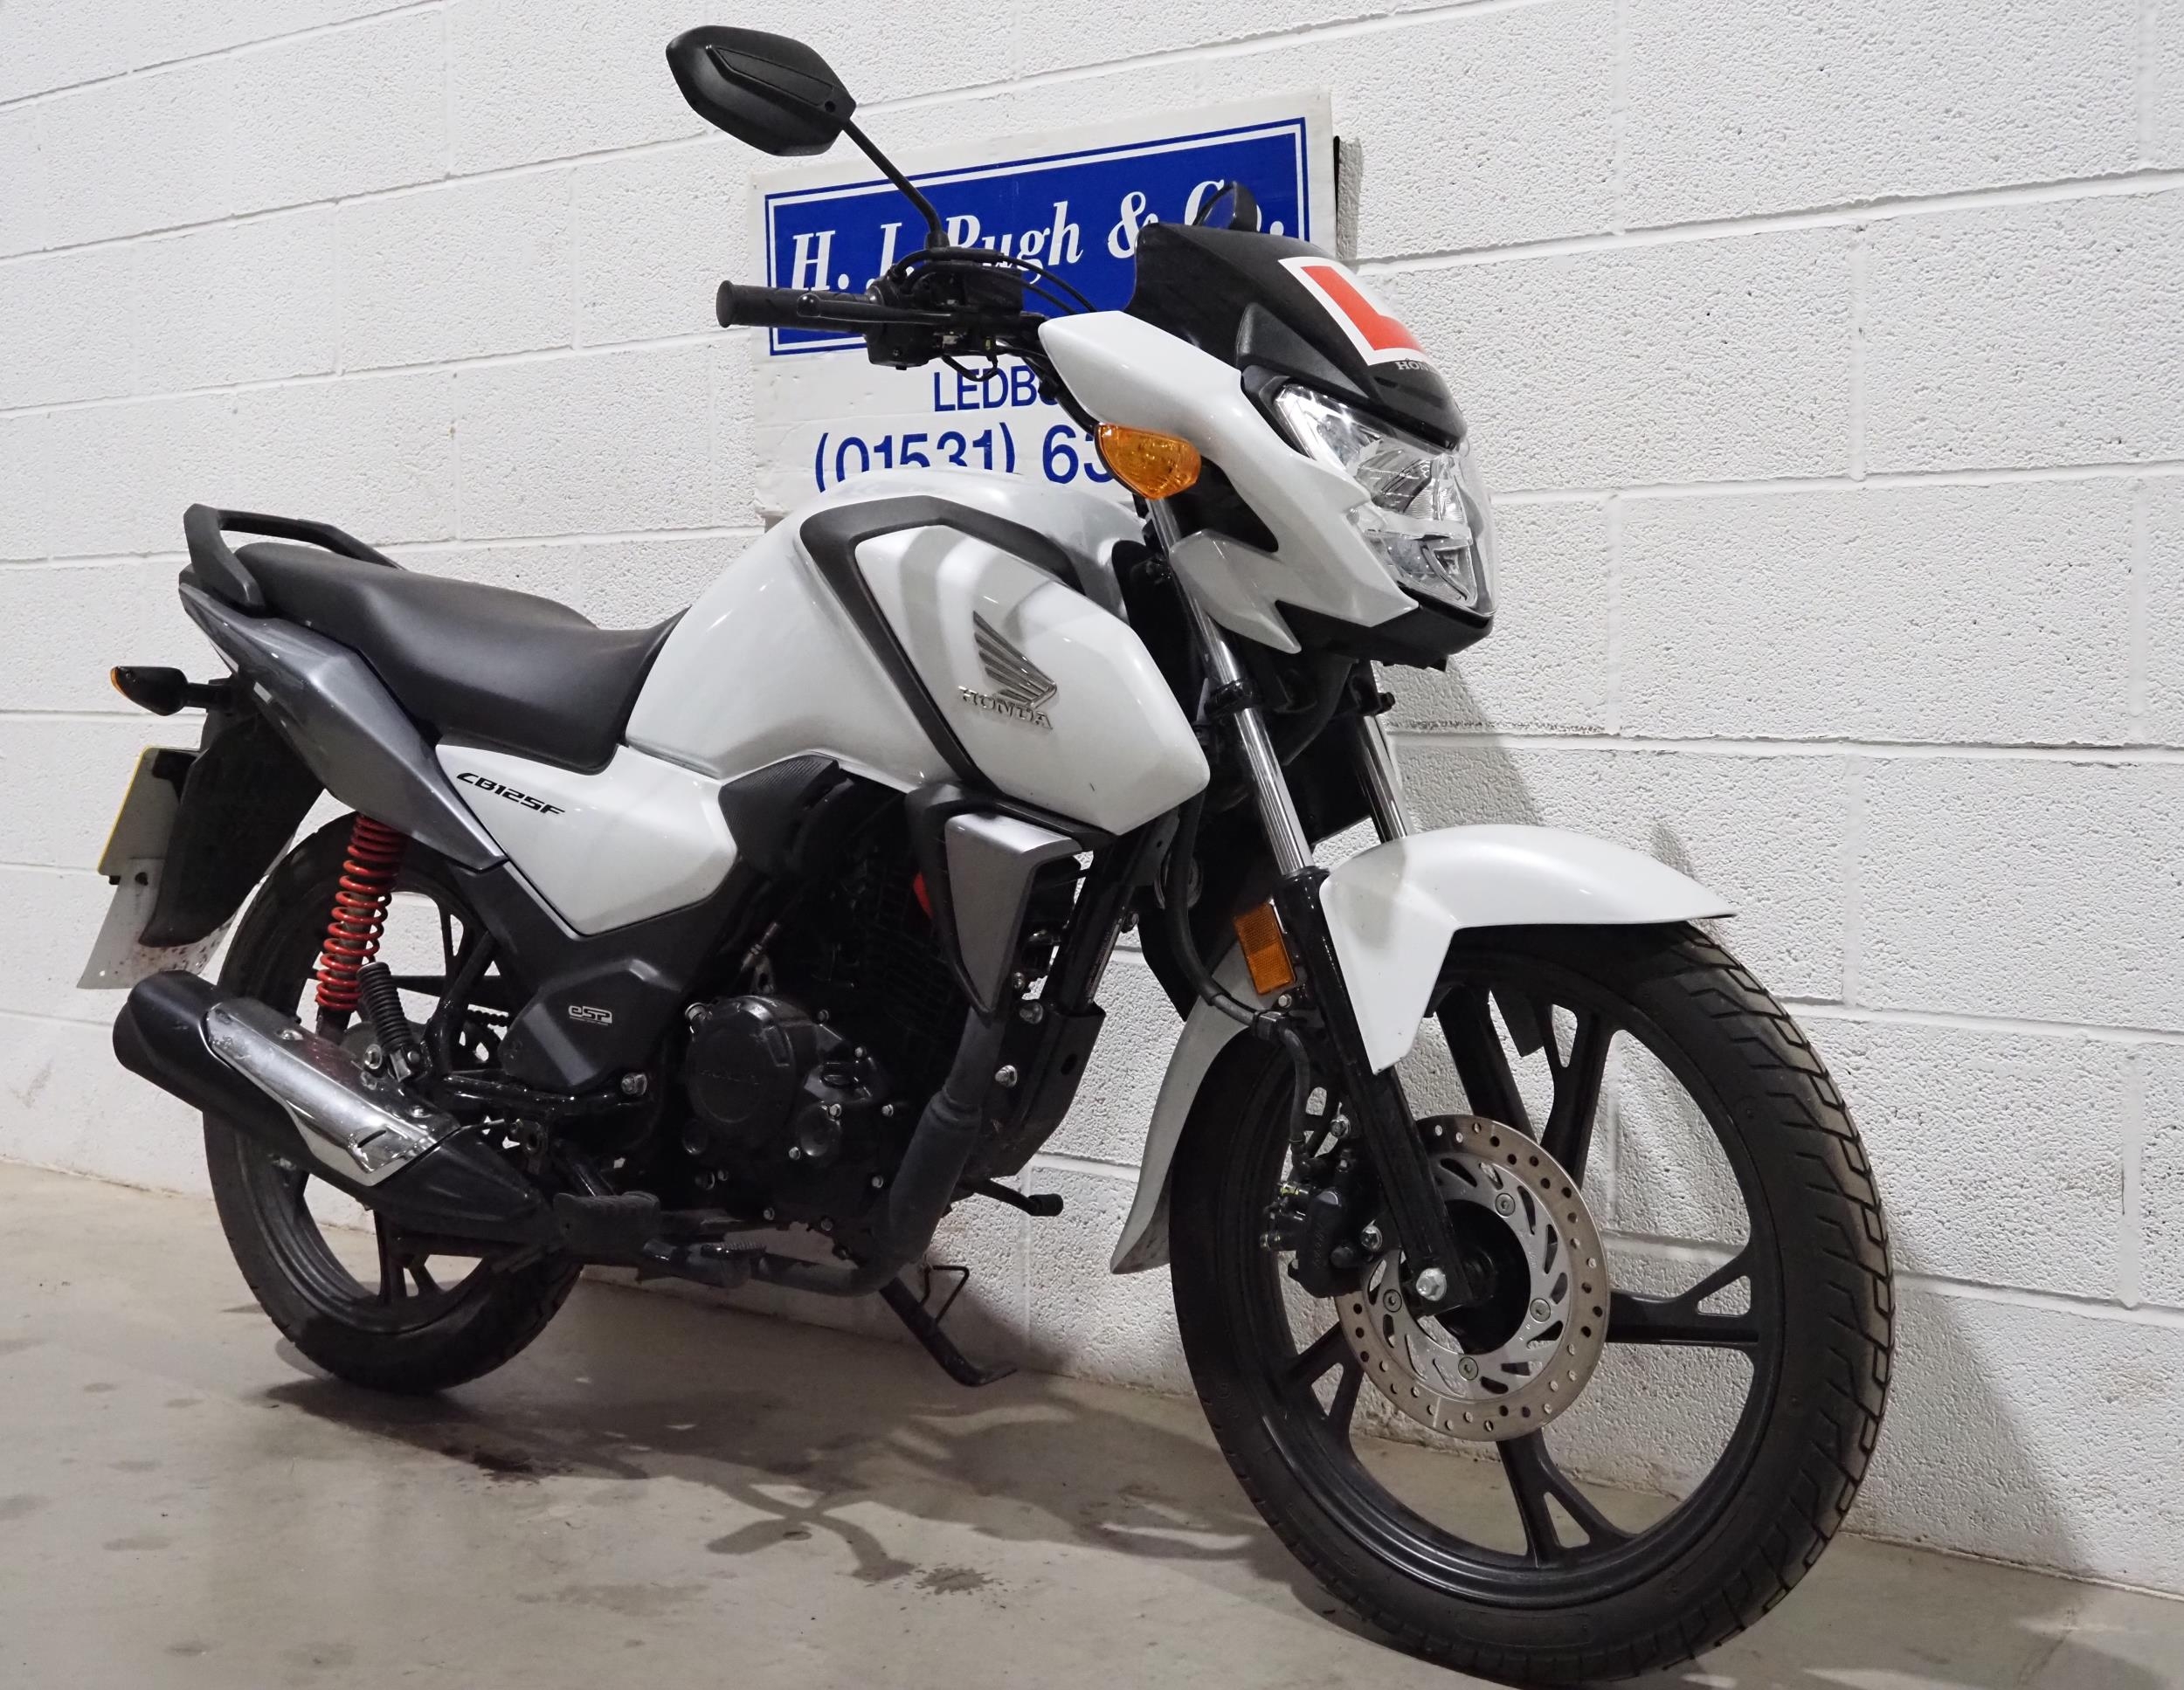 Honda CBF125 motorcycle. 2022. 124cc. Runs and rides. Recent service Comes with wheel lock, - Image 2 of 6